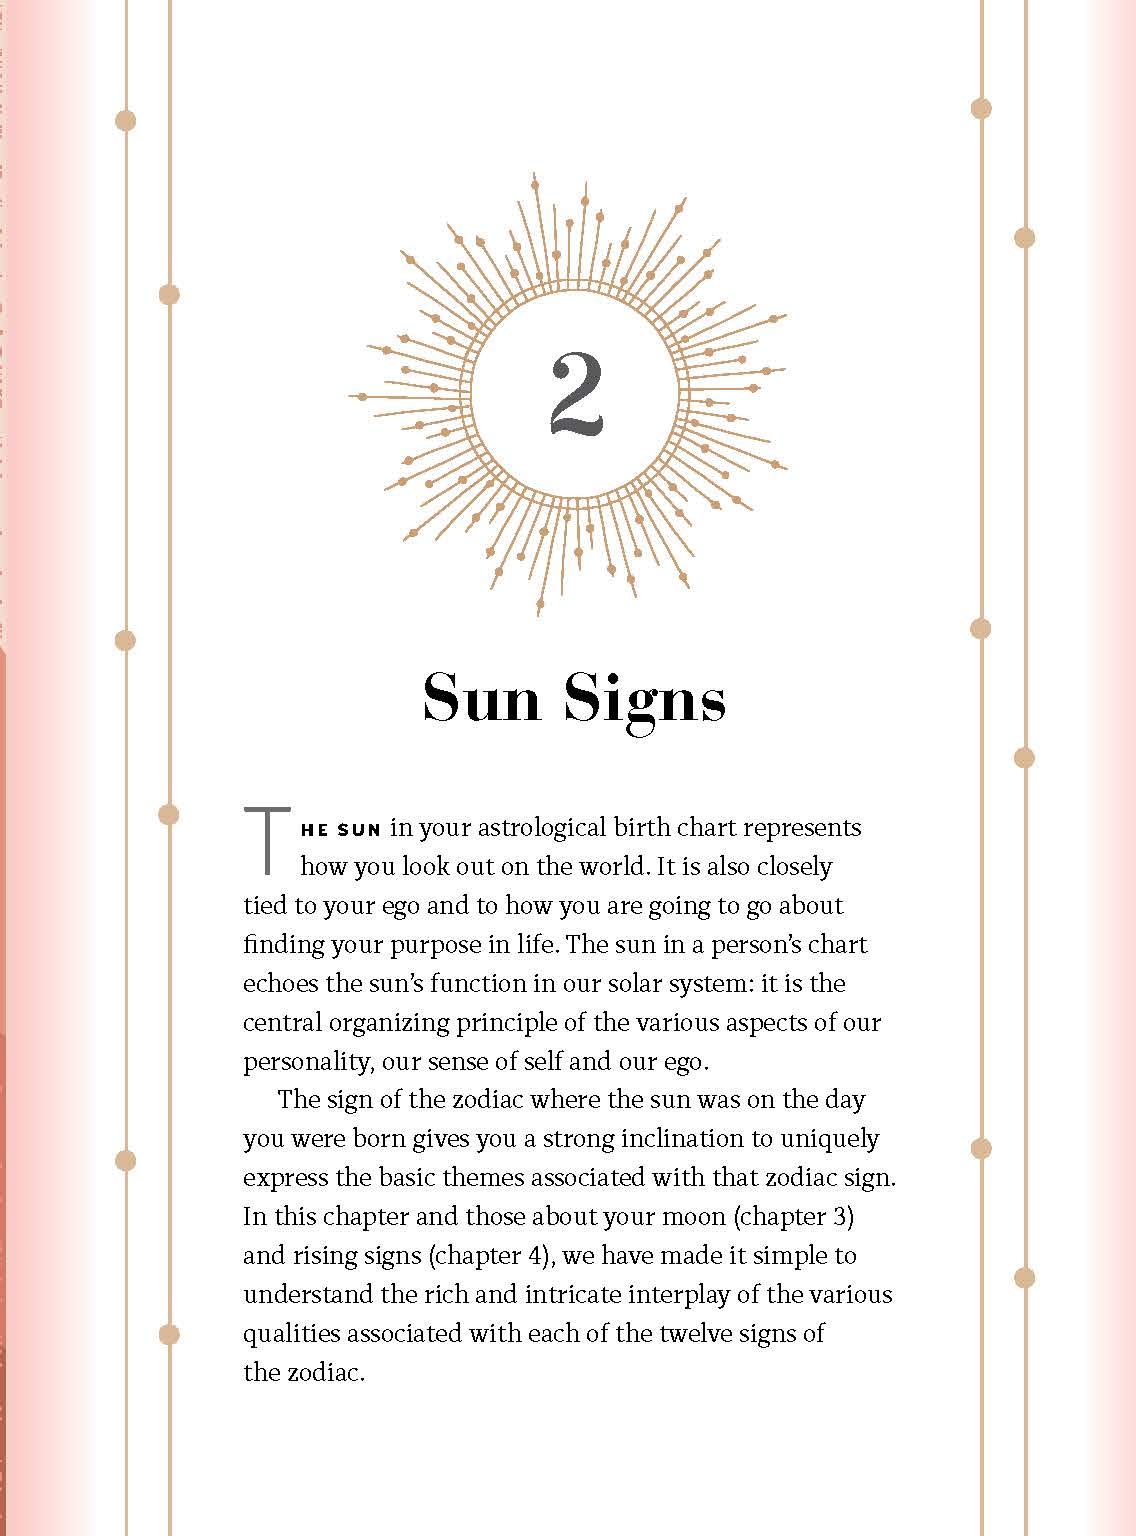 Mindful Astrology. Finding Peace Of Mind According To Your Sun, Moon, And Rising Sign Monte Farber, Amy Cerner / Монте Фарбер, Эми Цернер 9781631067471-11